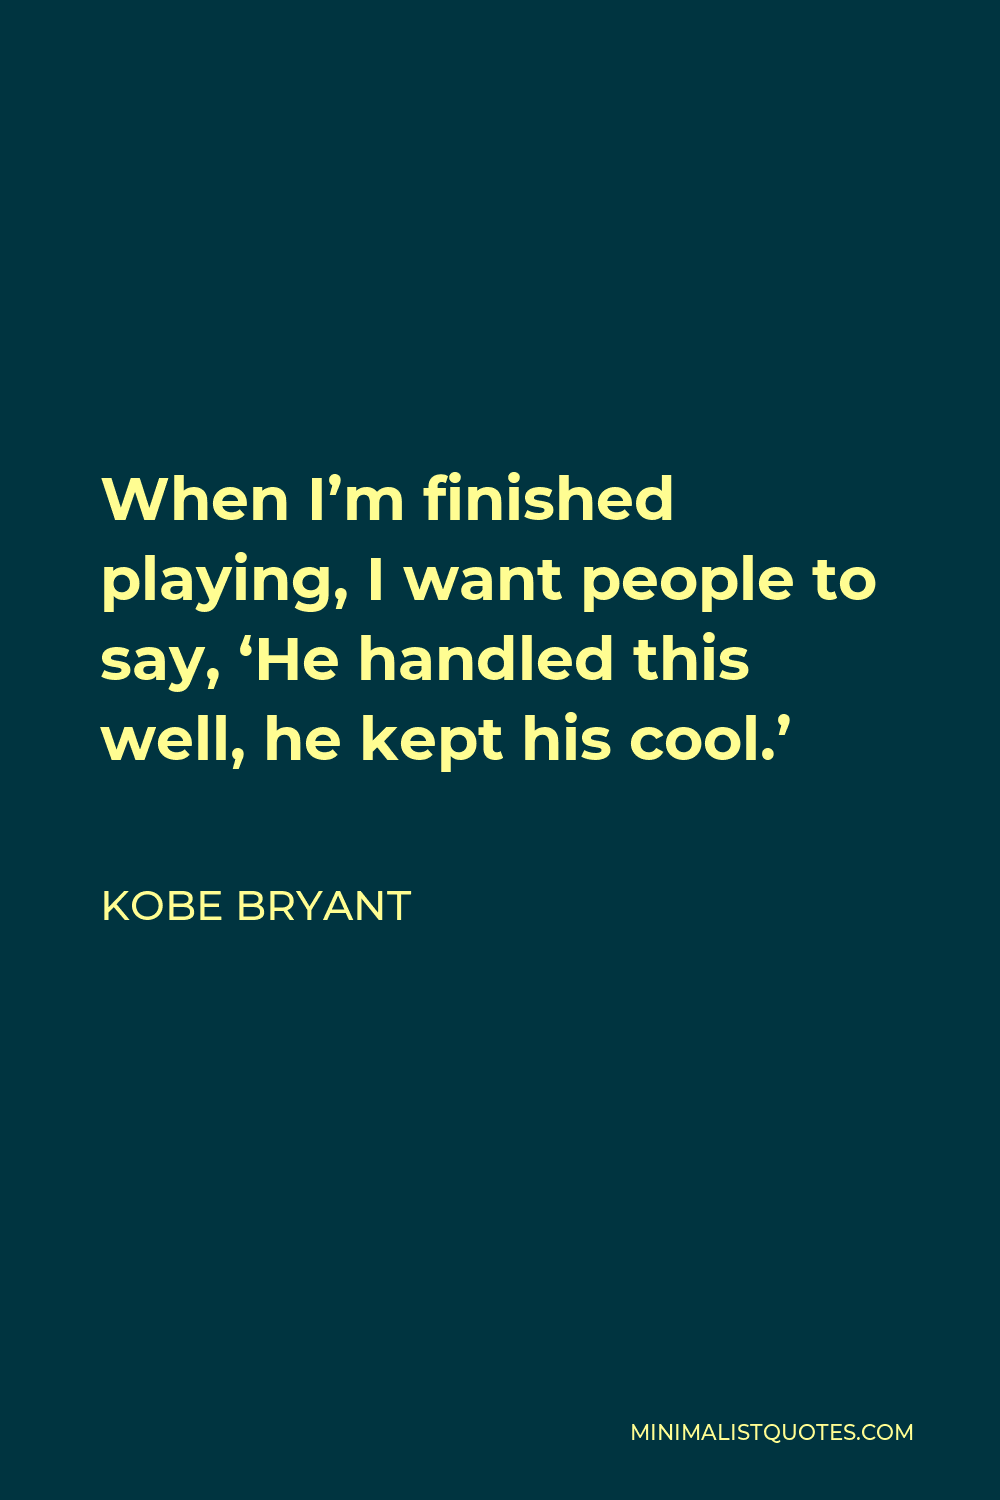 Kobe Bryant Quote - When I’m finished playing, I want people to say, ‘He handled this well, he kept his cool.’